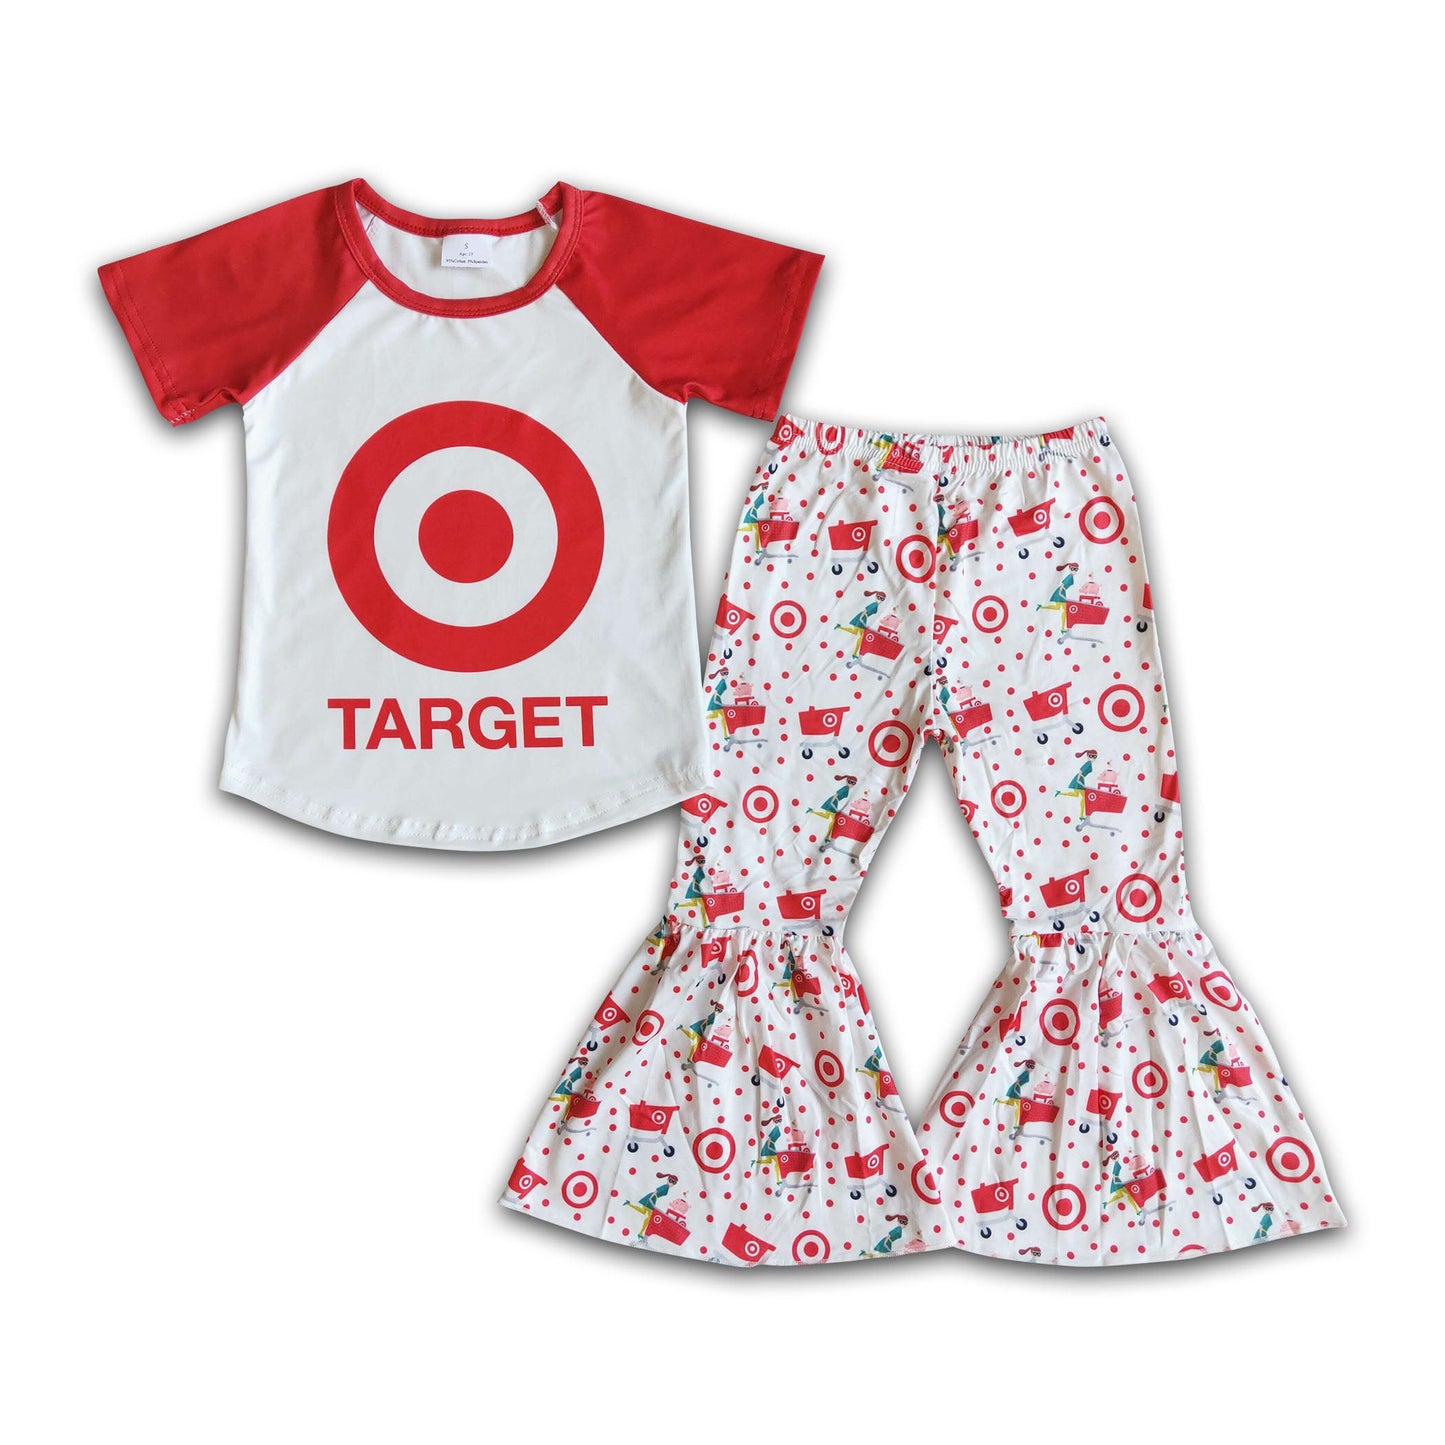 Target Outfit